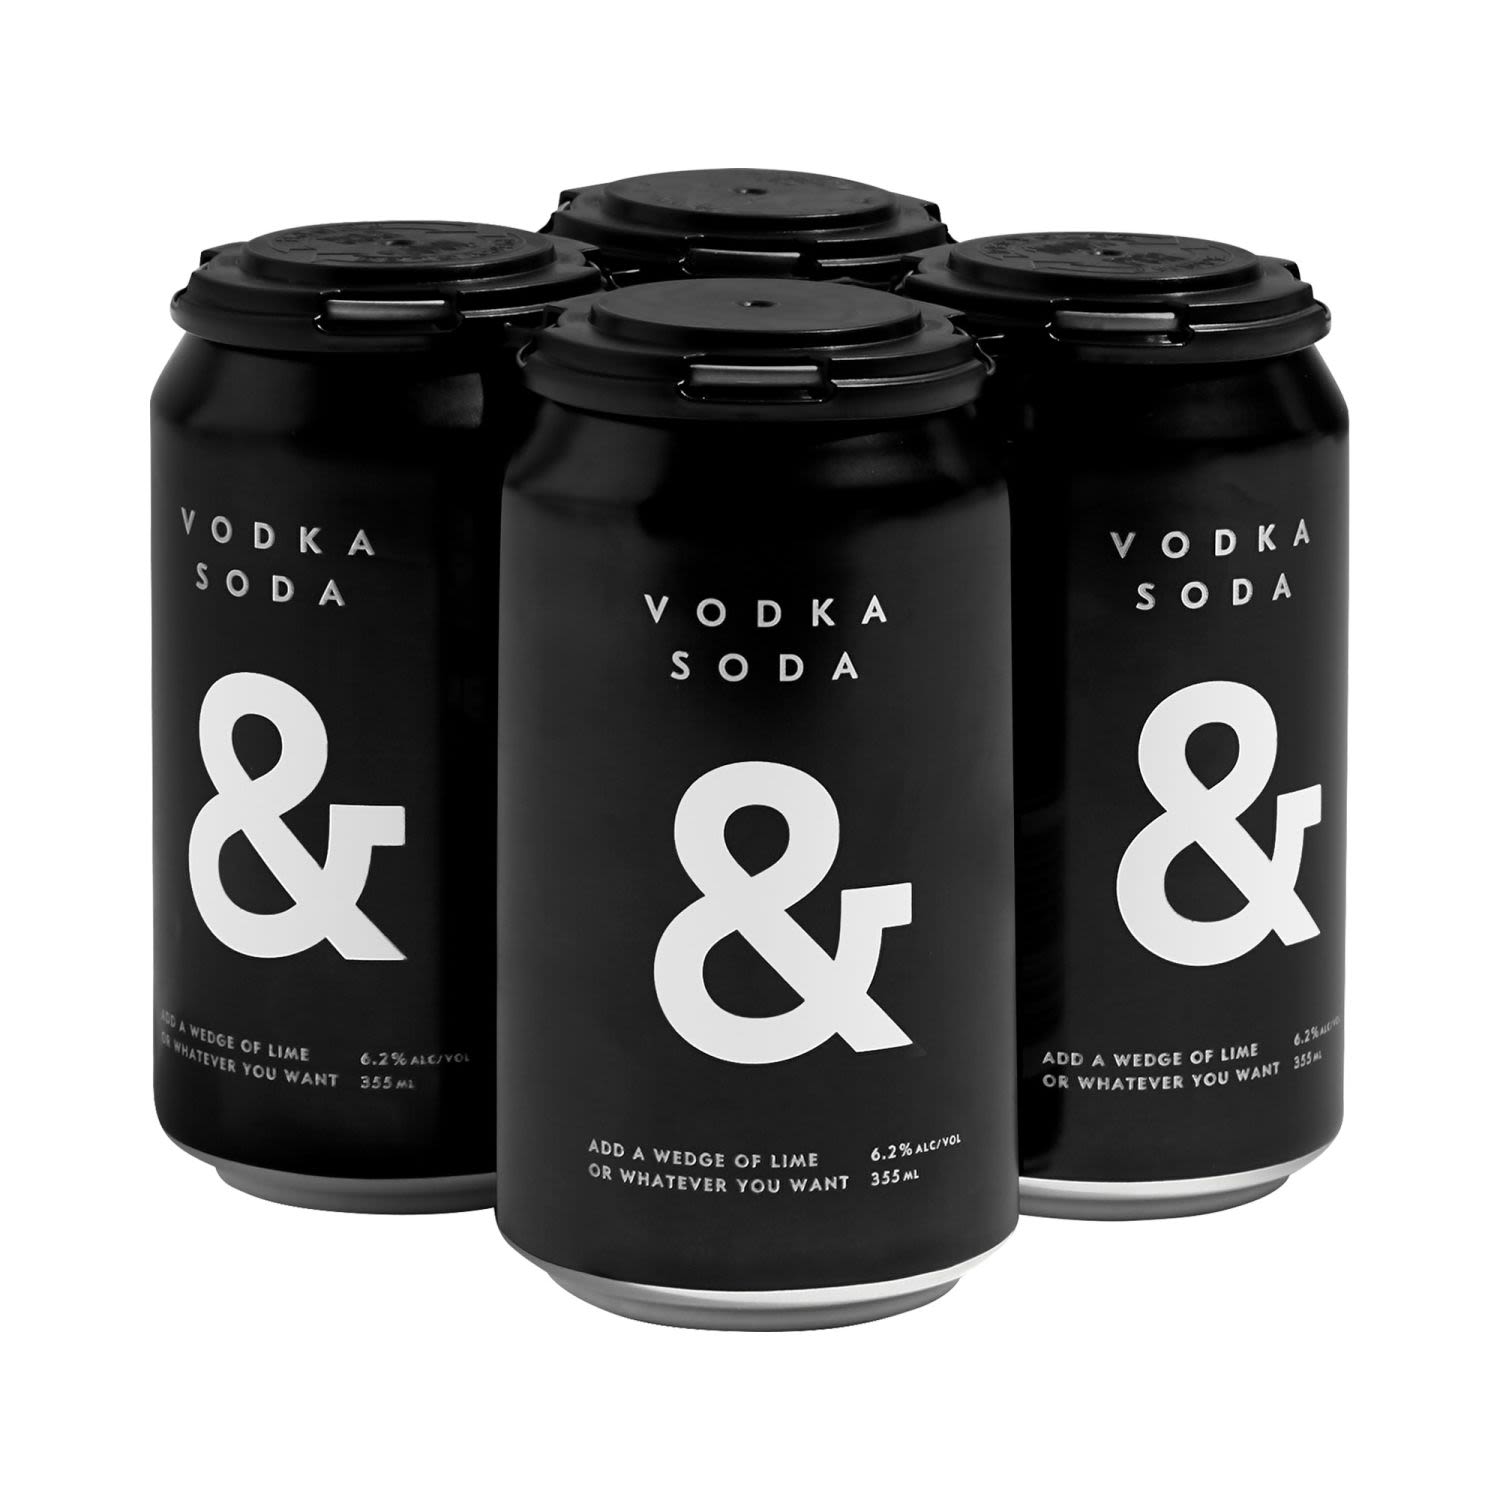 Vodka. Soda. That's it. Add whatever you want. A stronger drink that is also low cal.<br /> <br />Alcohol Volume: 6.20%<br /><br />Pack Format: 4 Pack<br /><br />Standard Drinks: 1.7</br /><br />Pack Type: Can<br /><br />Country of Origin: Australia<br />